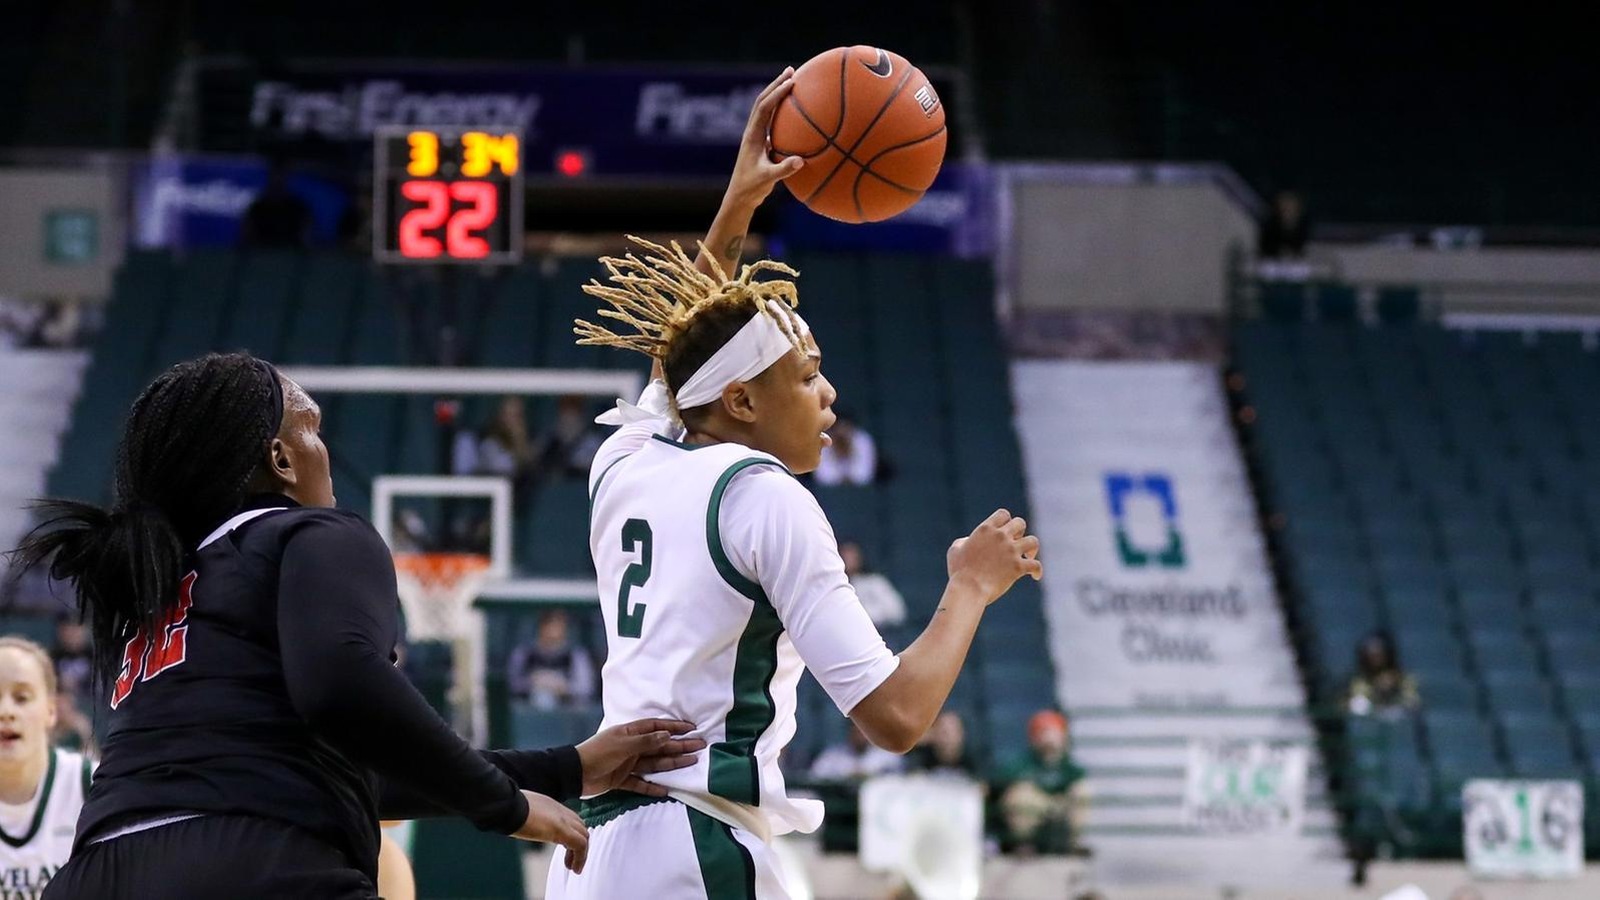 Crockett Double-Double Leads CSU To 83-43 Victory At UIC